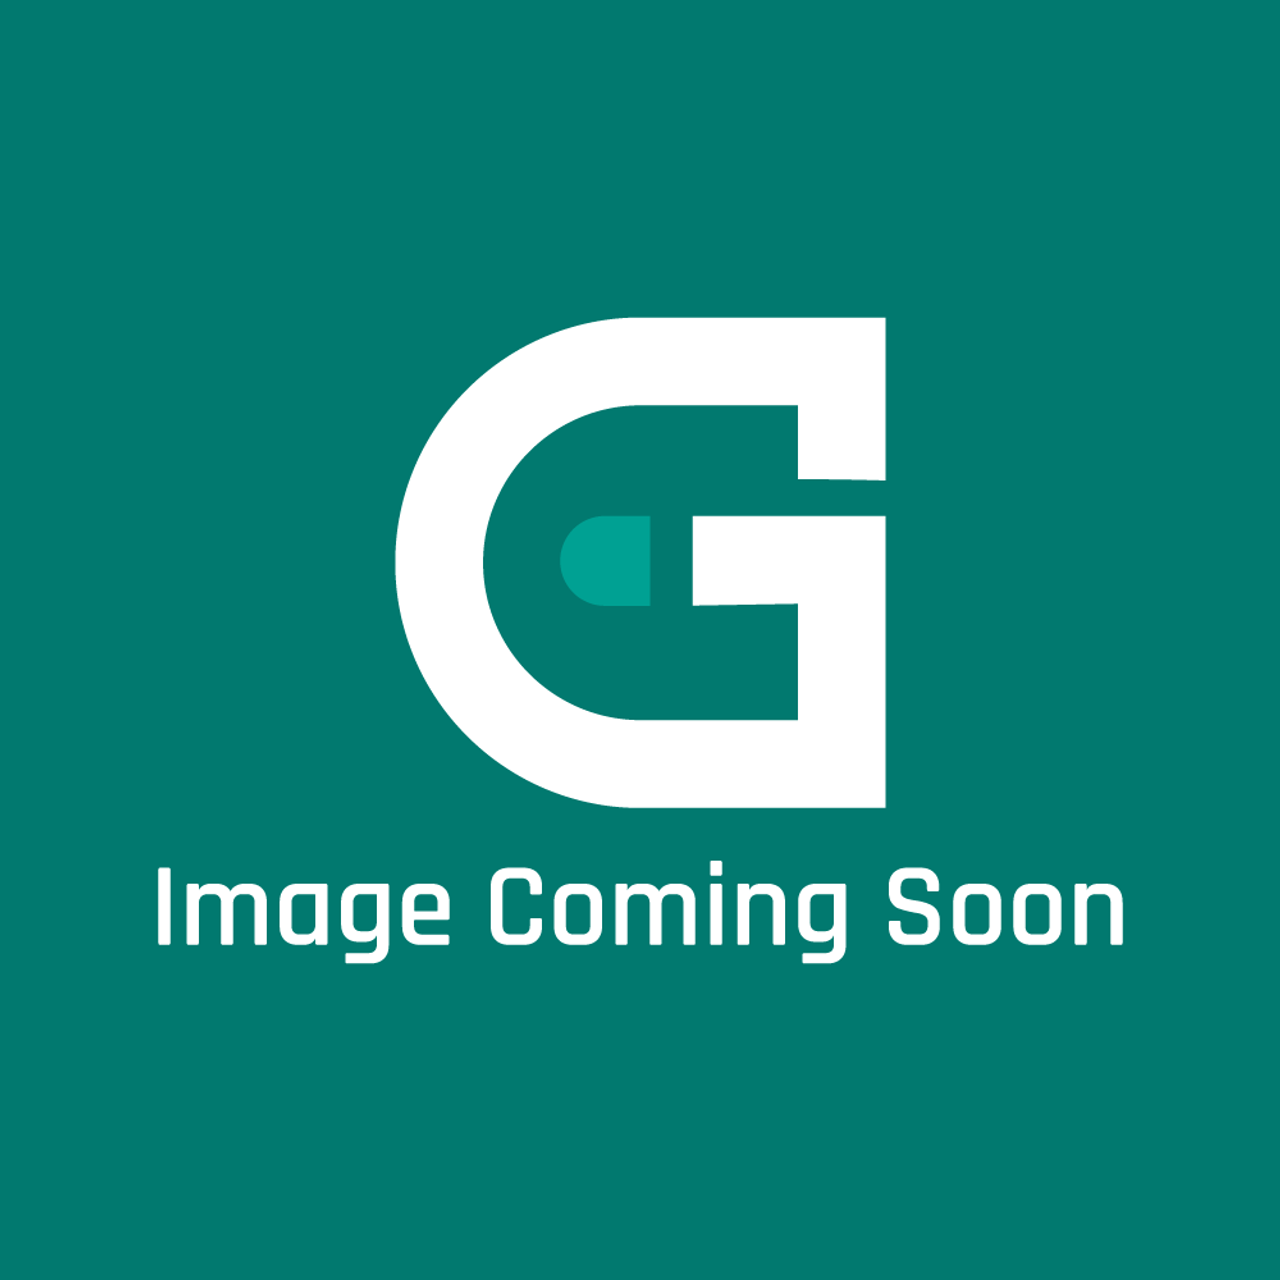 GE Appliances WR22X10050 - Cover Door-Dairy - Image Coming Soon!